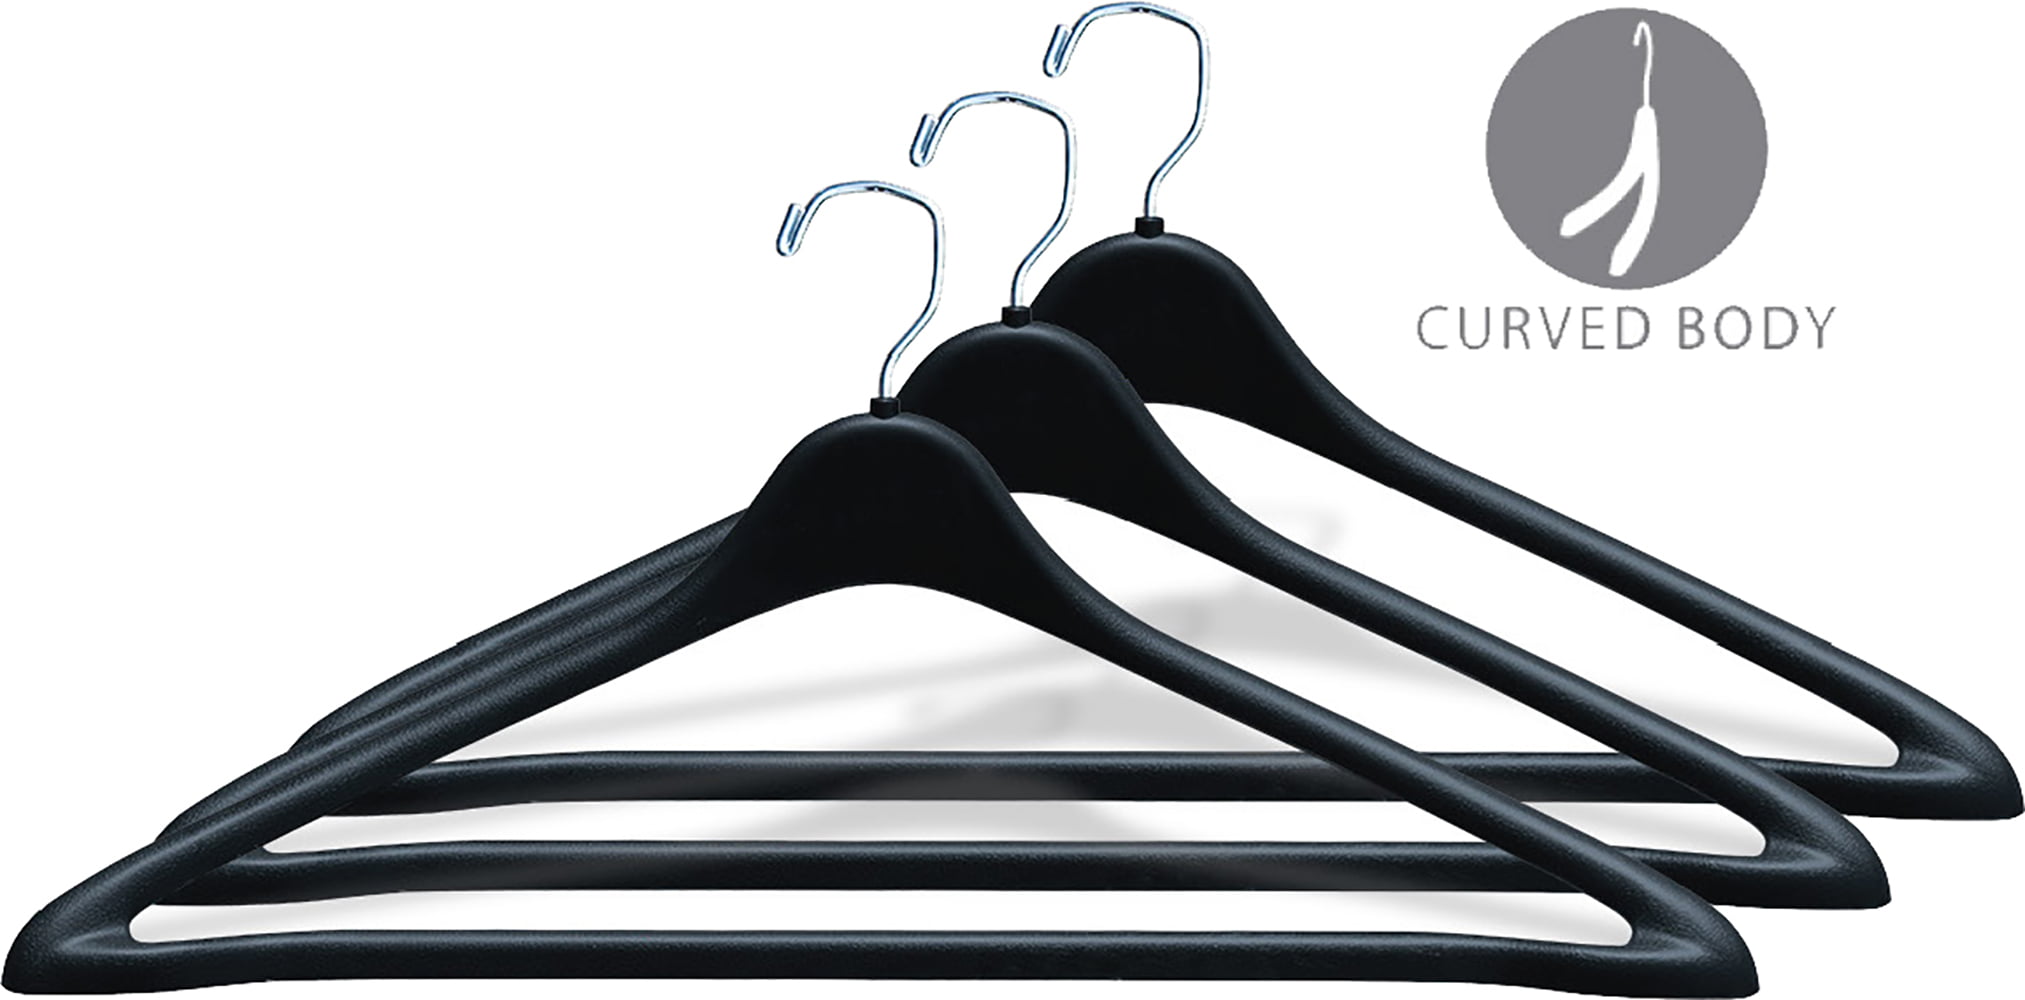 24 Giant Tubular Plastic Hanger - Super Duty, 24 Hangers, Proudly Made in  The USA!